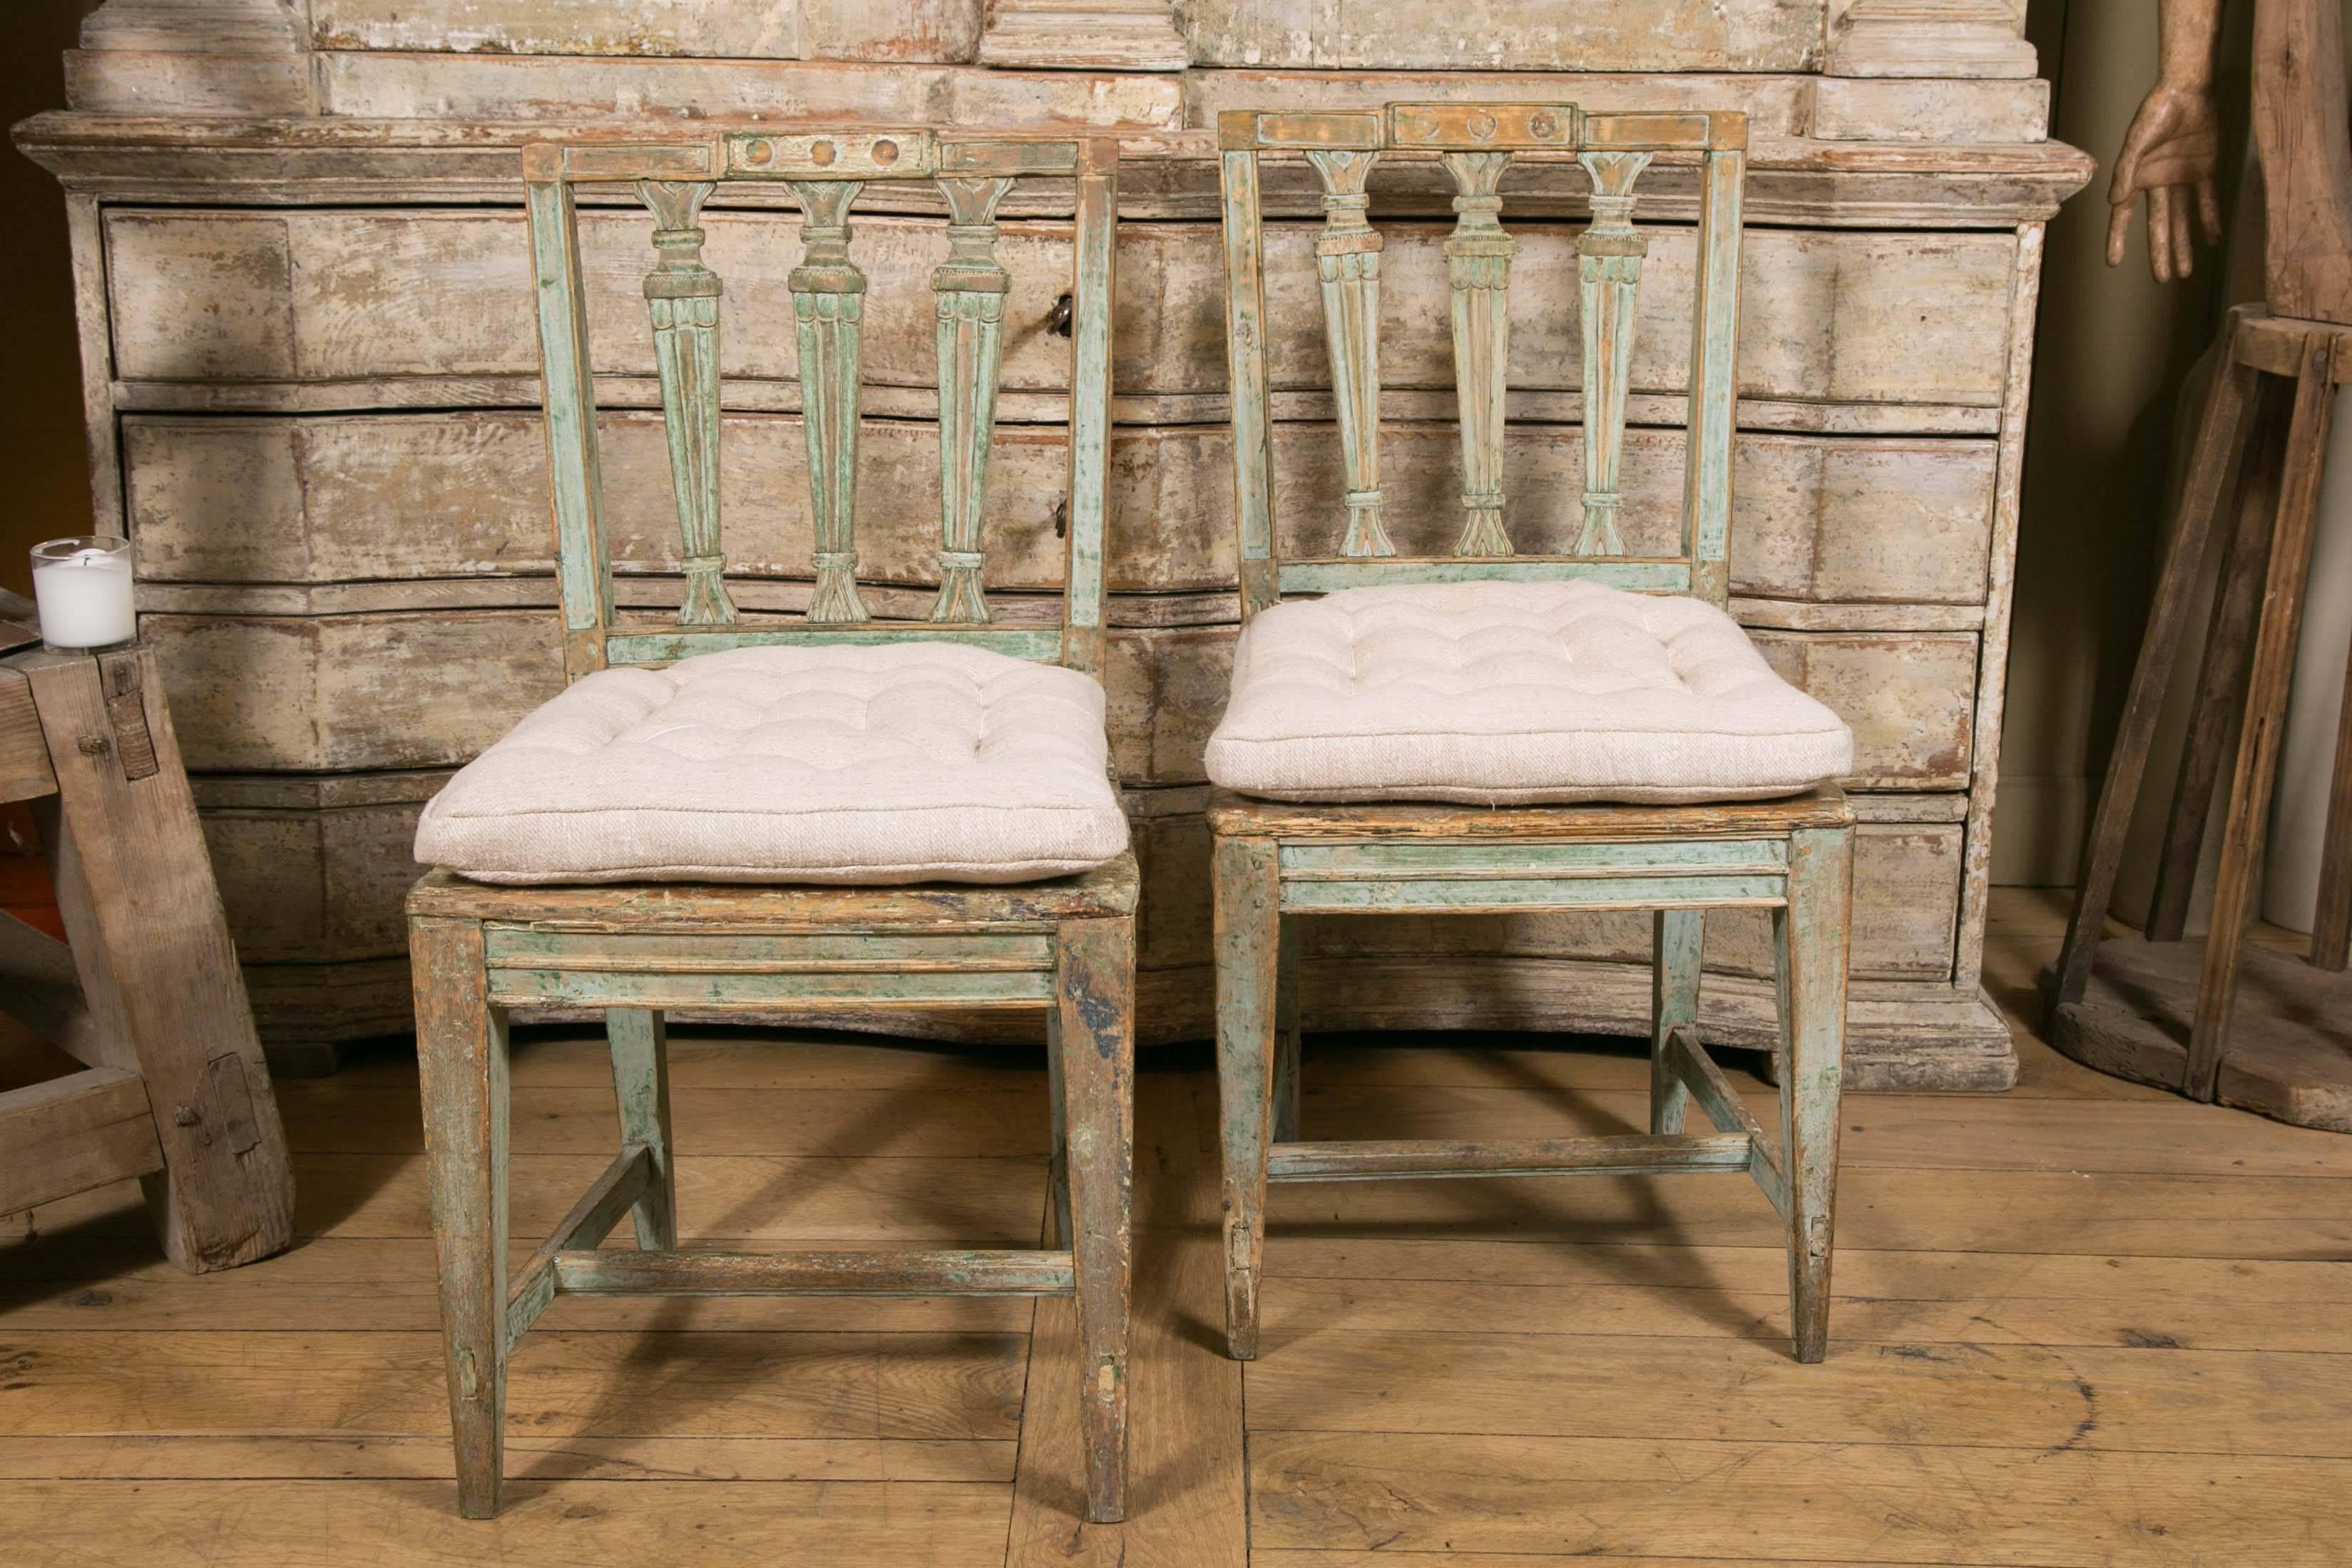 Very elegant model with three stylized carved columns in the backrest and beautiful vivid green patina of origin.
Seating is in plain wood so we have added a soft linen cushion for more comfort.
From Sweden 19th century.